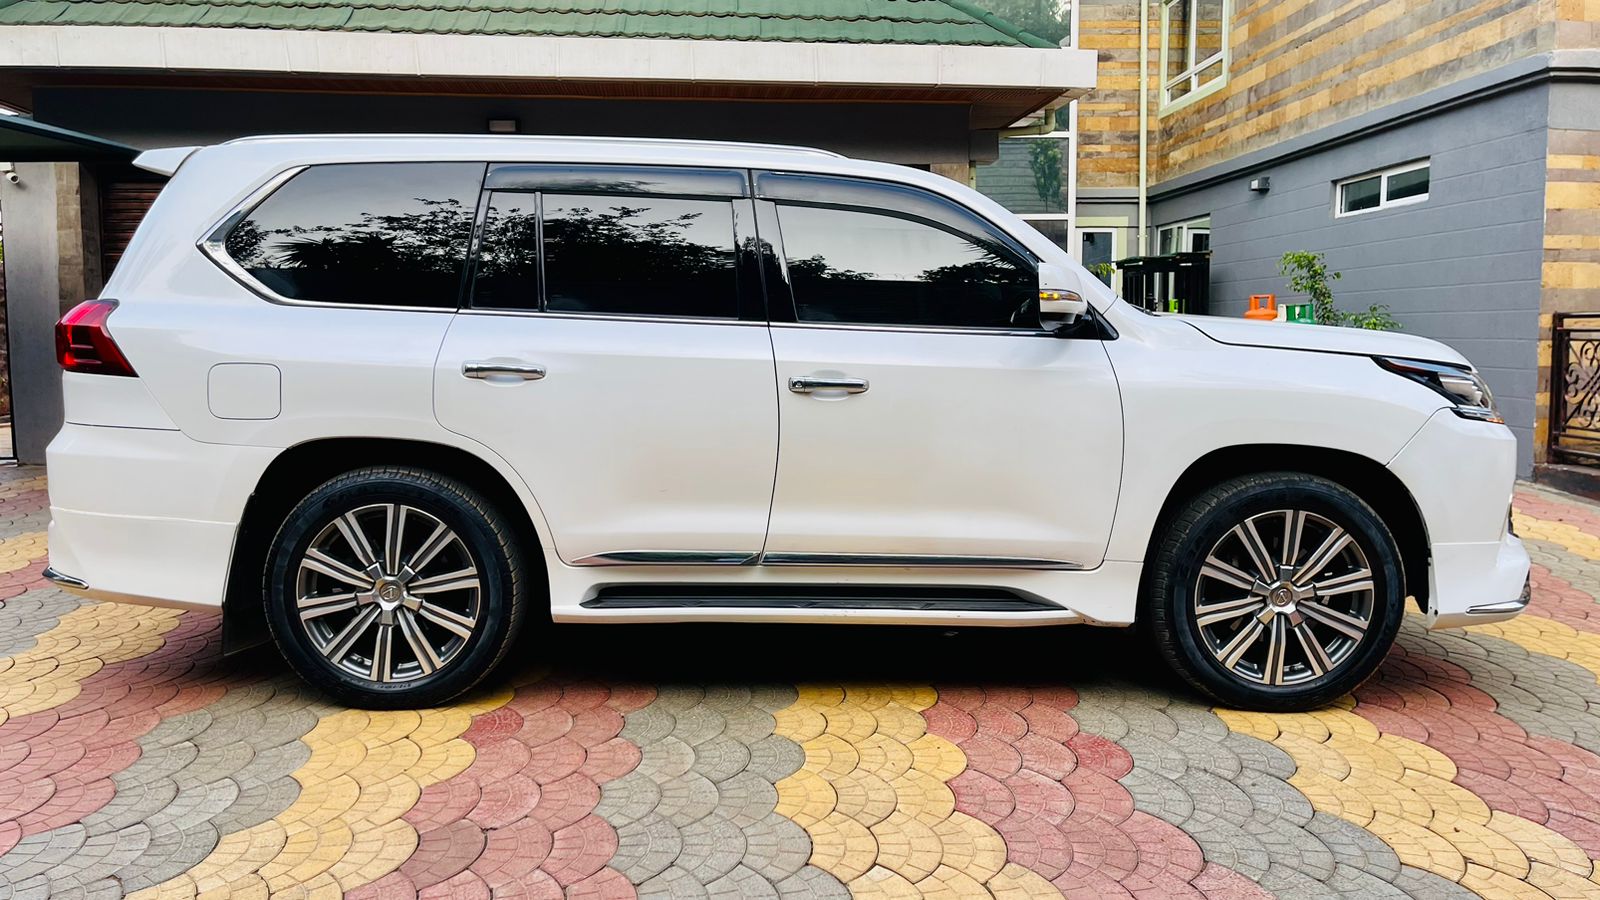 LEXUS LX 570 2016 Fully Loaded JUST ARRIVED EXCLUSIVE For SALE in Kenya